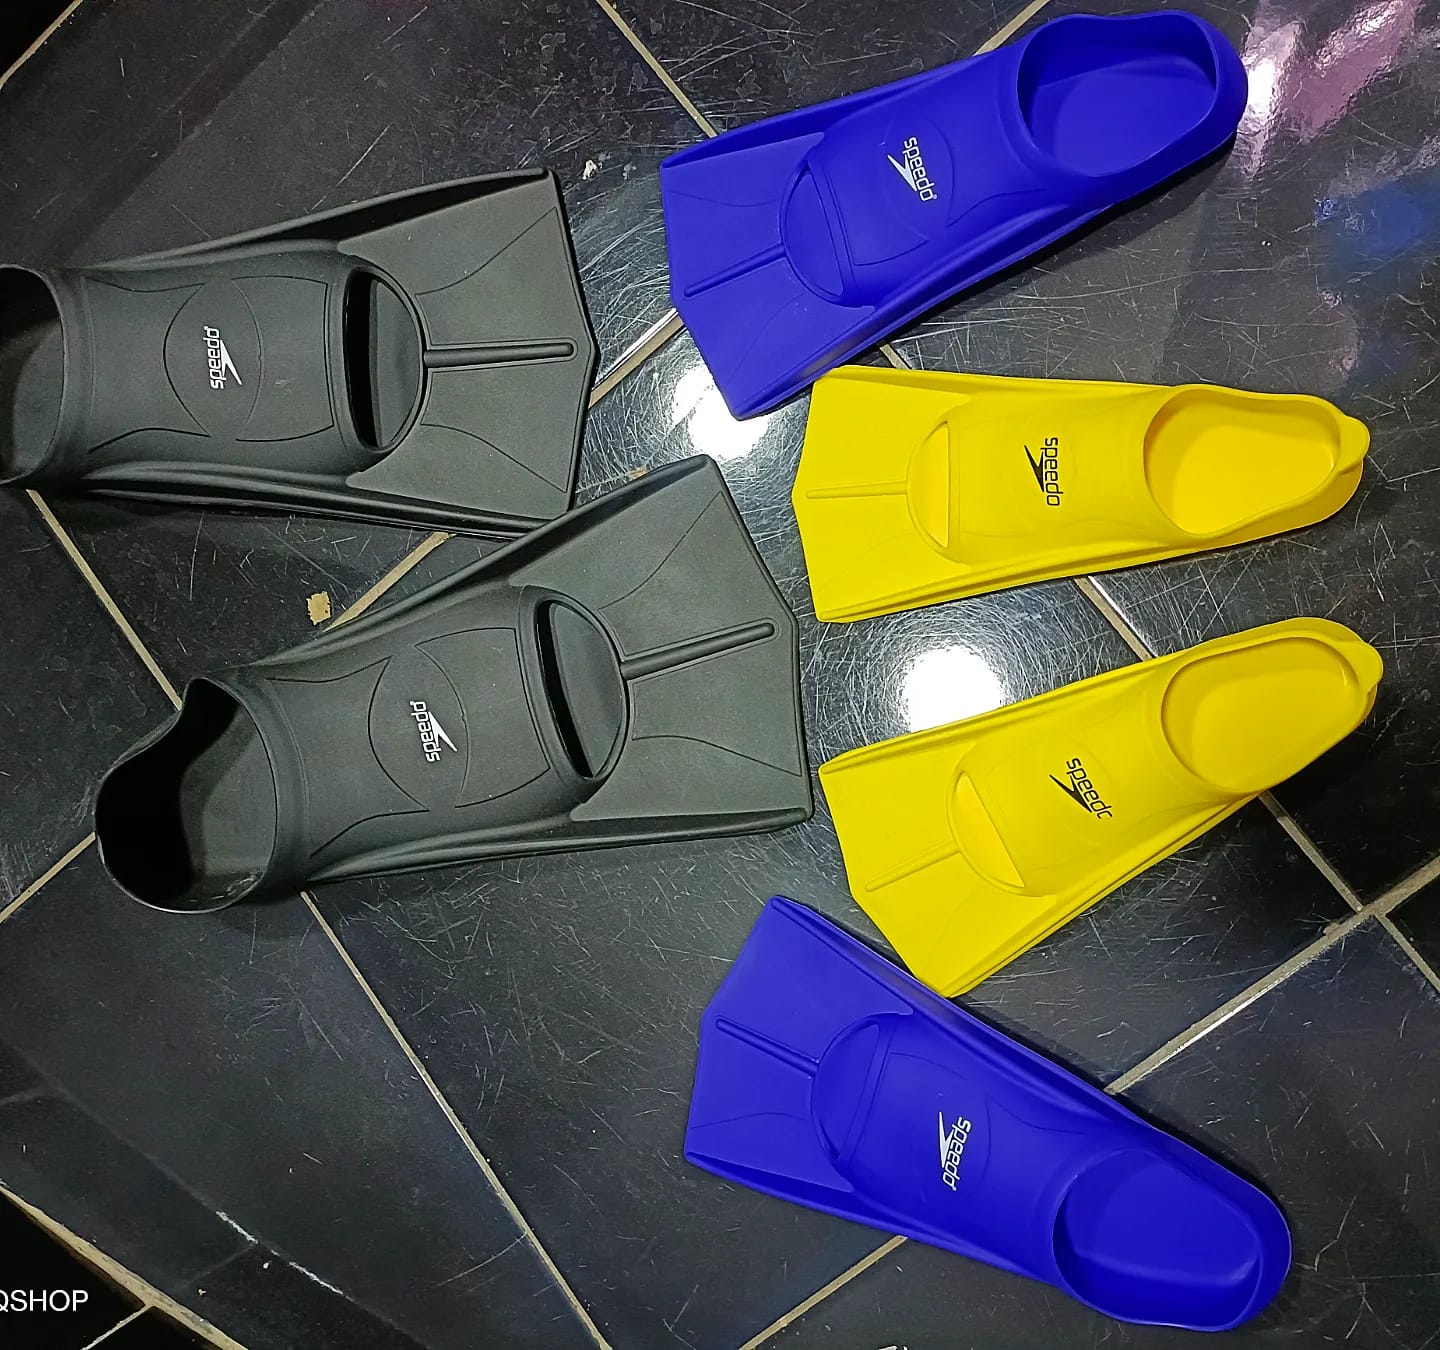 Long and short Swimming fins